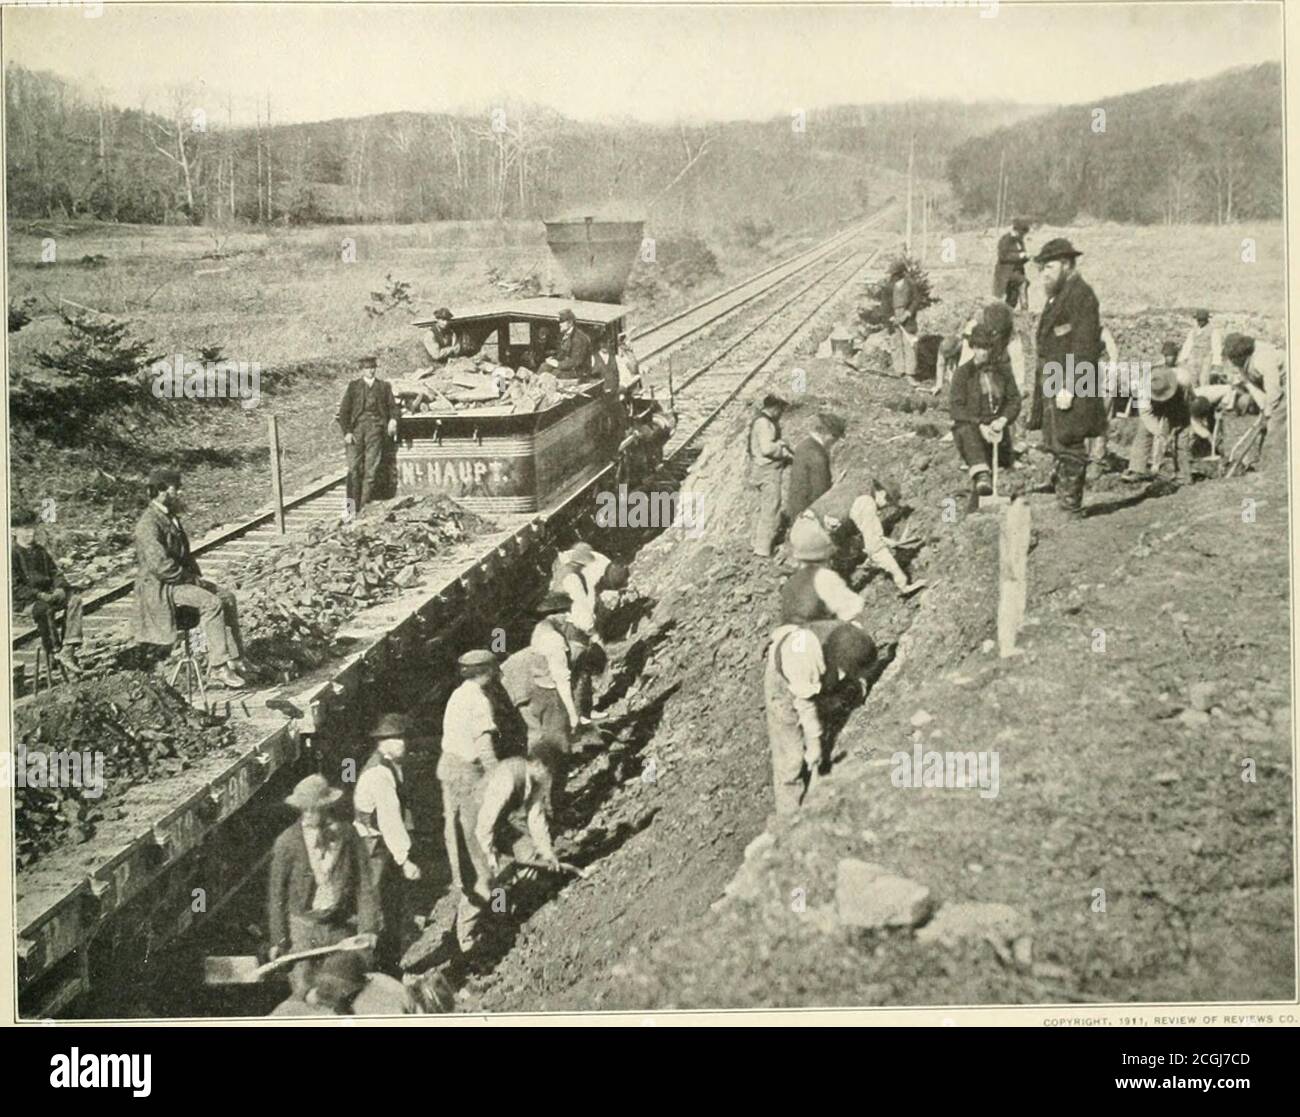 . The photographic history of the Civil War : thousands of scenes photographed 1861-65, with text by many special authorities . i ■ neview of nevii GENERAL HAUPT INSPECTING THE MILITARY RAILROAD L863 ::ene is near bull bun—general haupt stands it th K RIGHT -Till: ENGINE HAS BEEN NAMED U UK HIM On the embankment stands Genera. Haupt overseeing the actual «„rk he railroad. This ,., .graph give, an uuhca ,f ! , L no detail was too small for to ins, t. He ™ a graduate of the 0 1 States M.h,»ry Academy . - , He resigned his commissi after graduation 1 ente railroad serv in the B I - * « *- S —bfbr Stock Photo